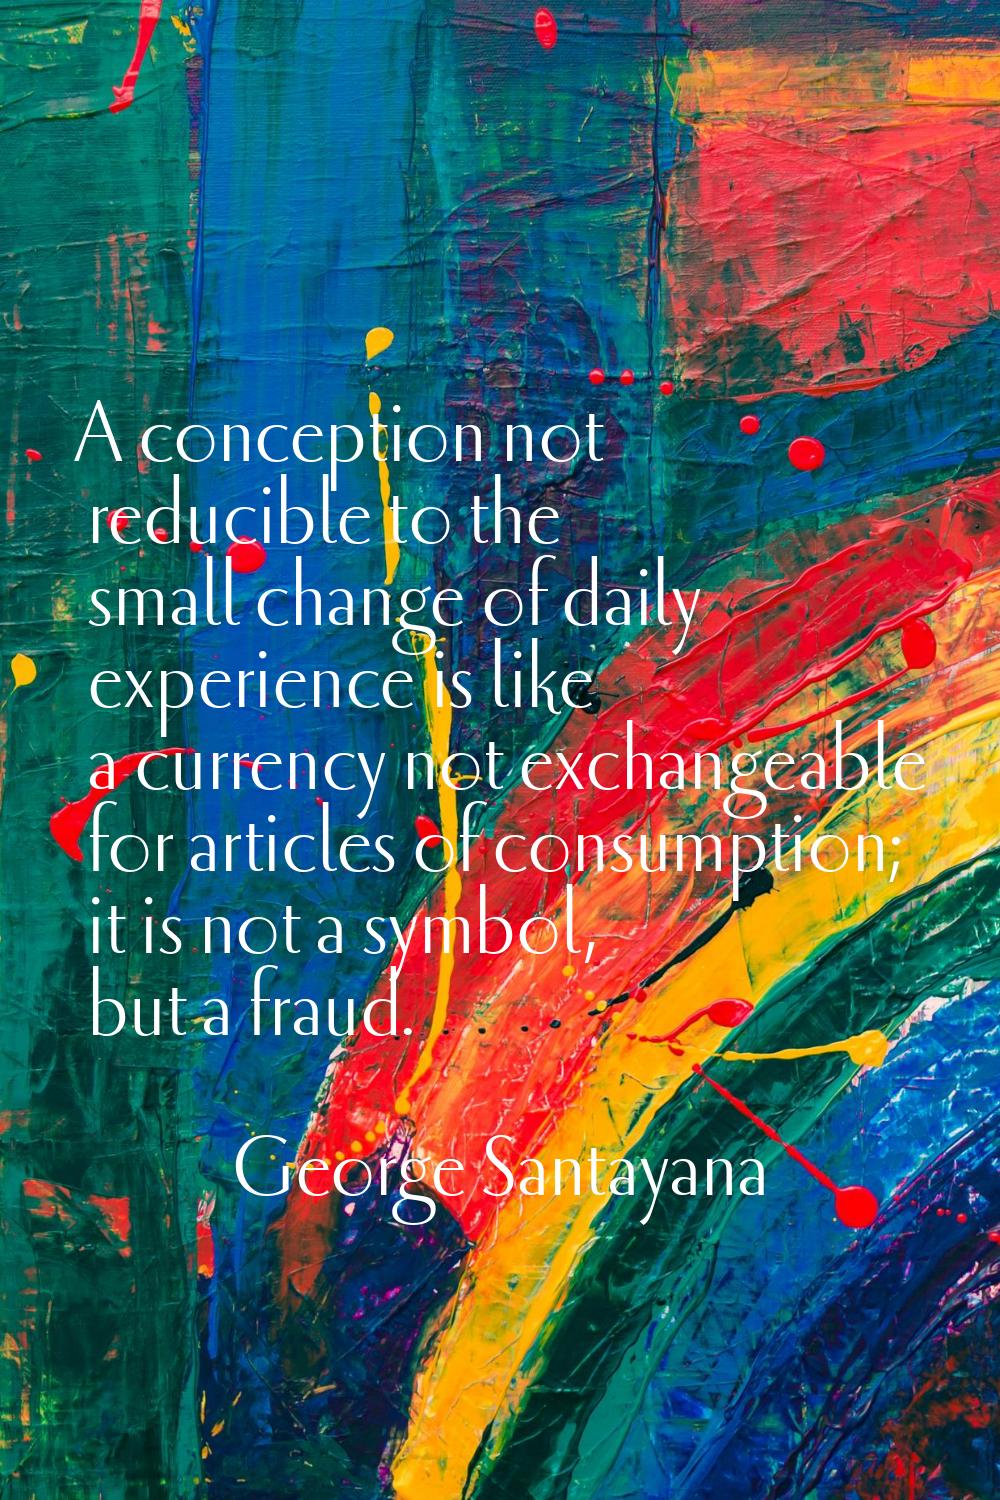 A conception not reducible to the small change of daily experience is like a currency not exchangea